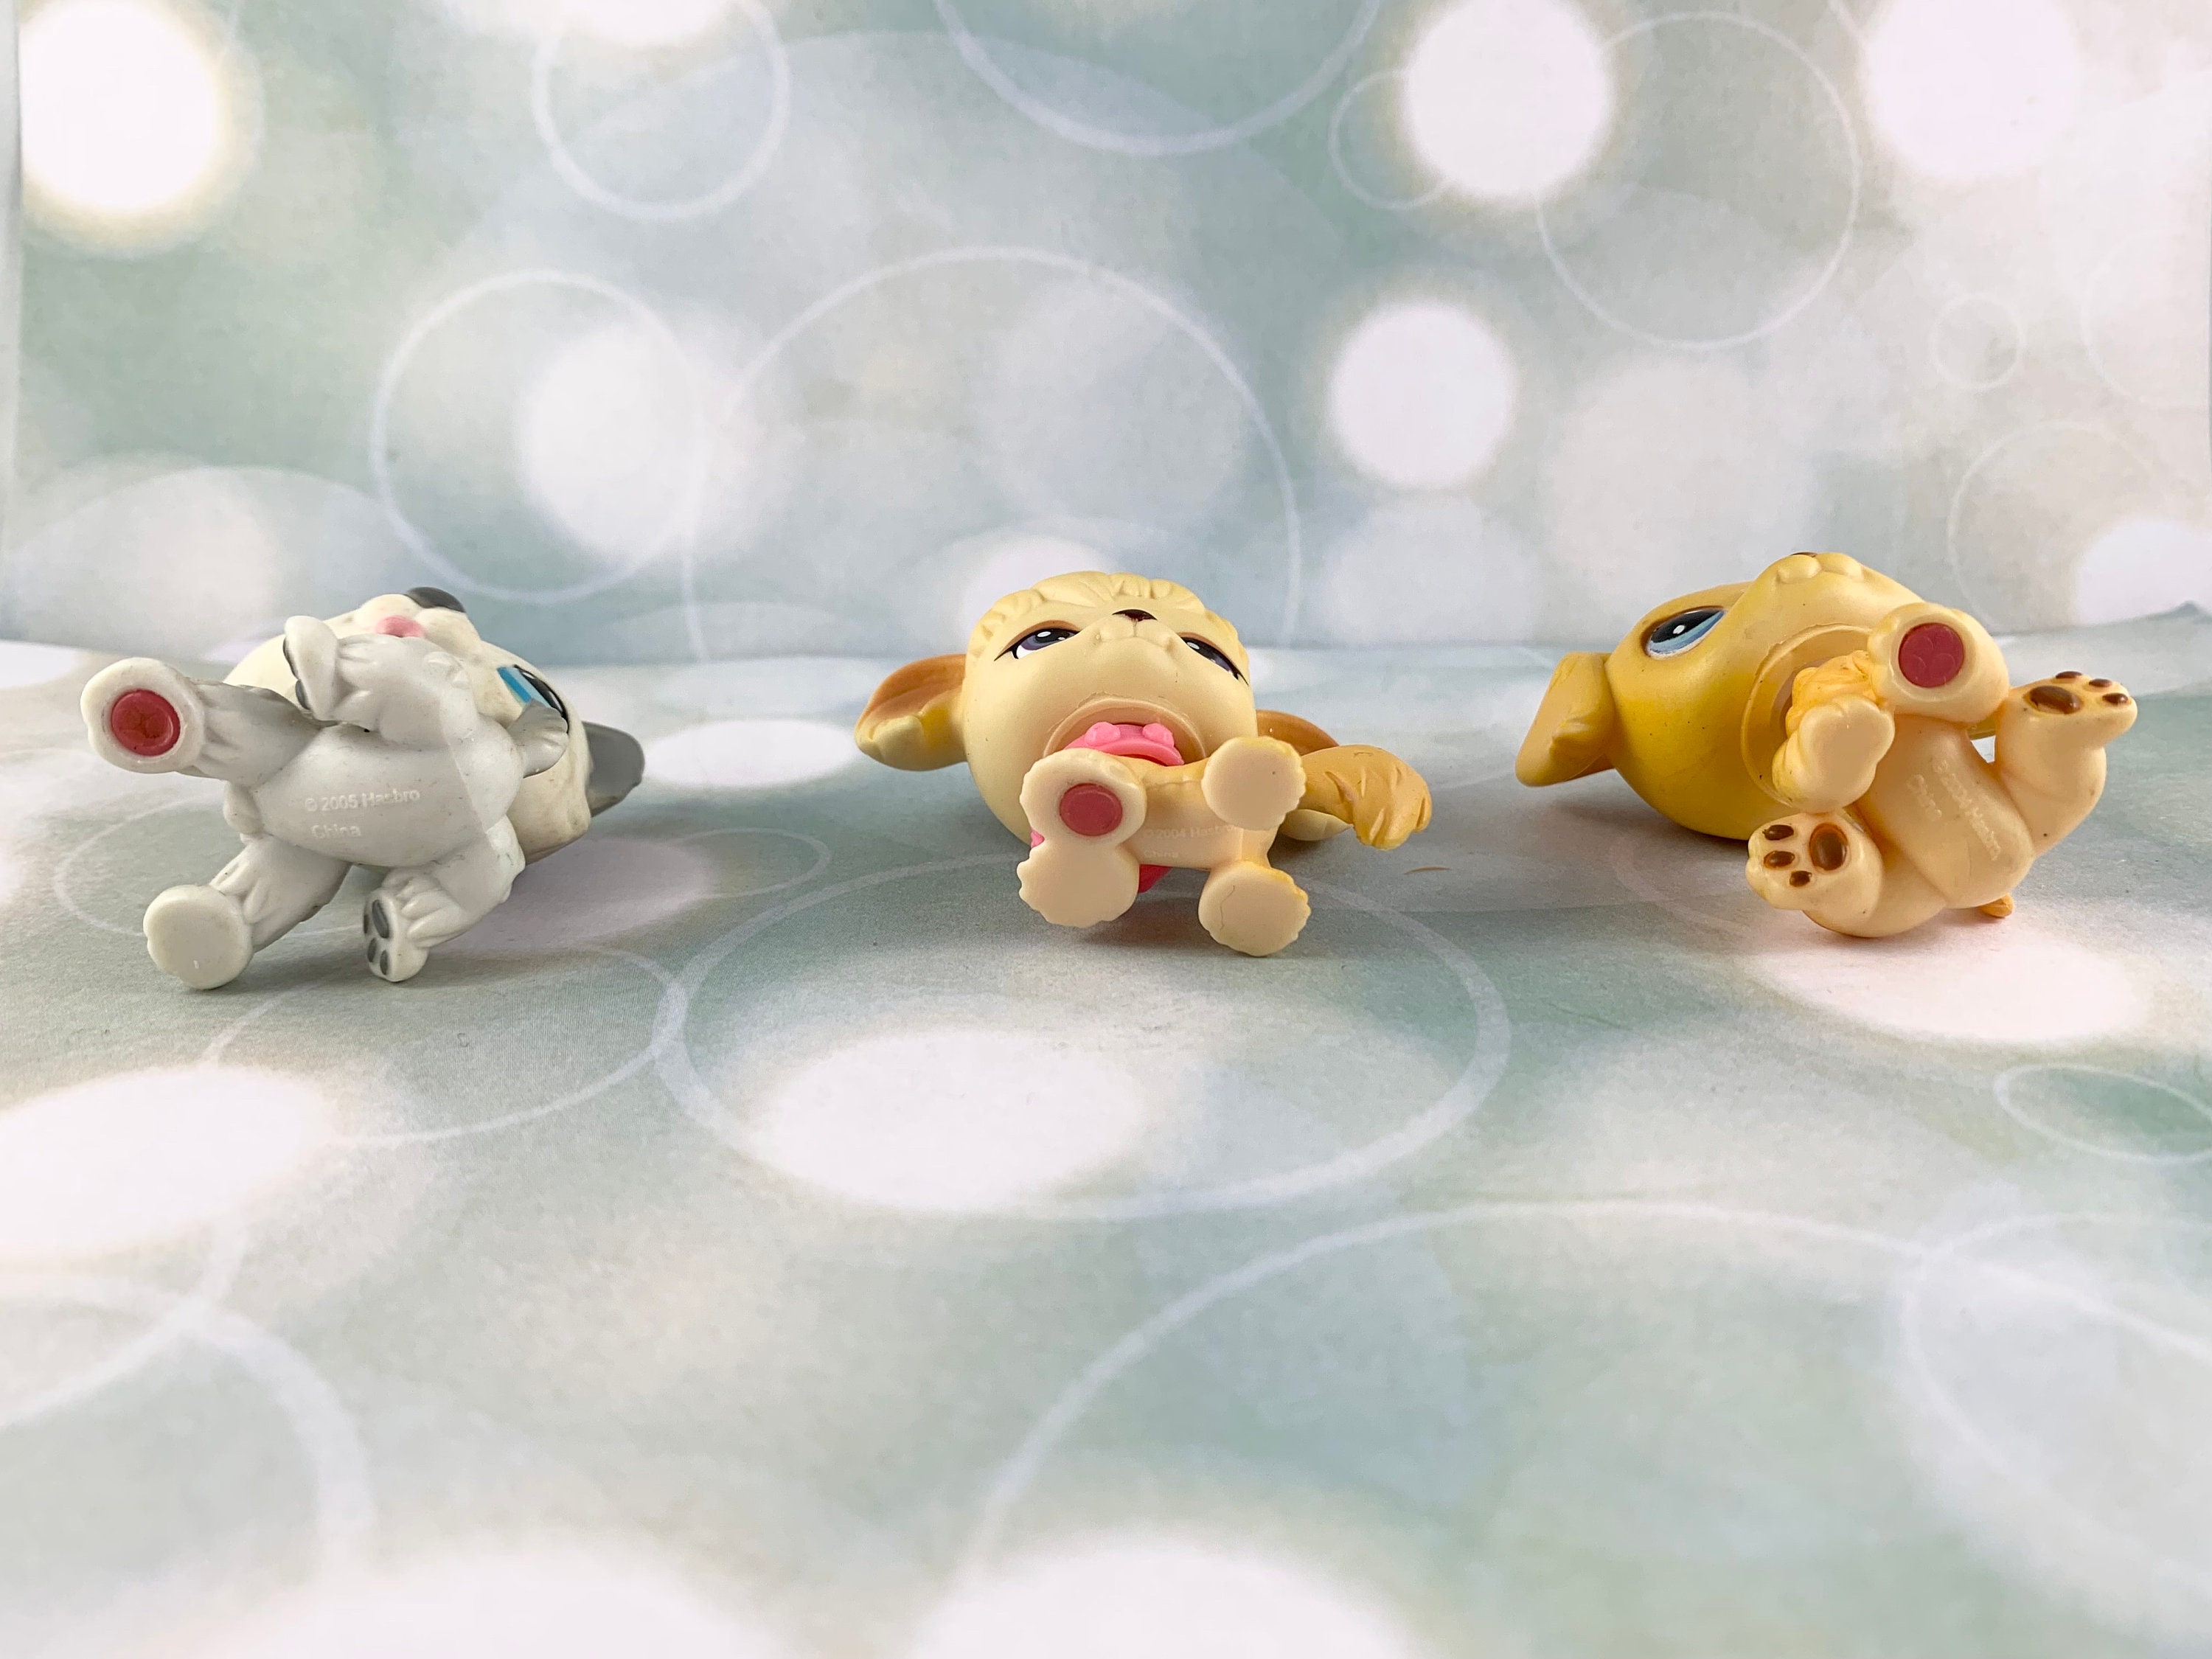 Retired Littlest Pet Shop Dogs, Dogs and More Dogs You Pick 